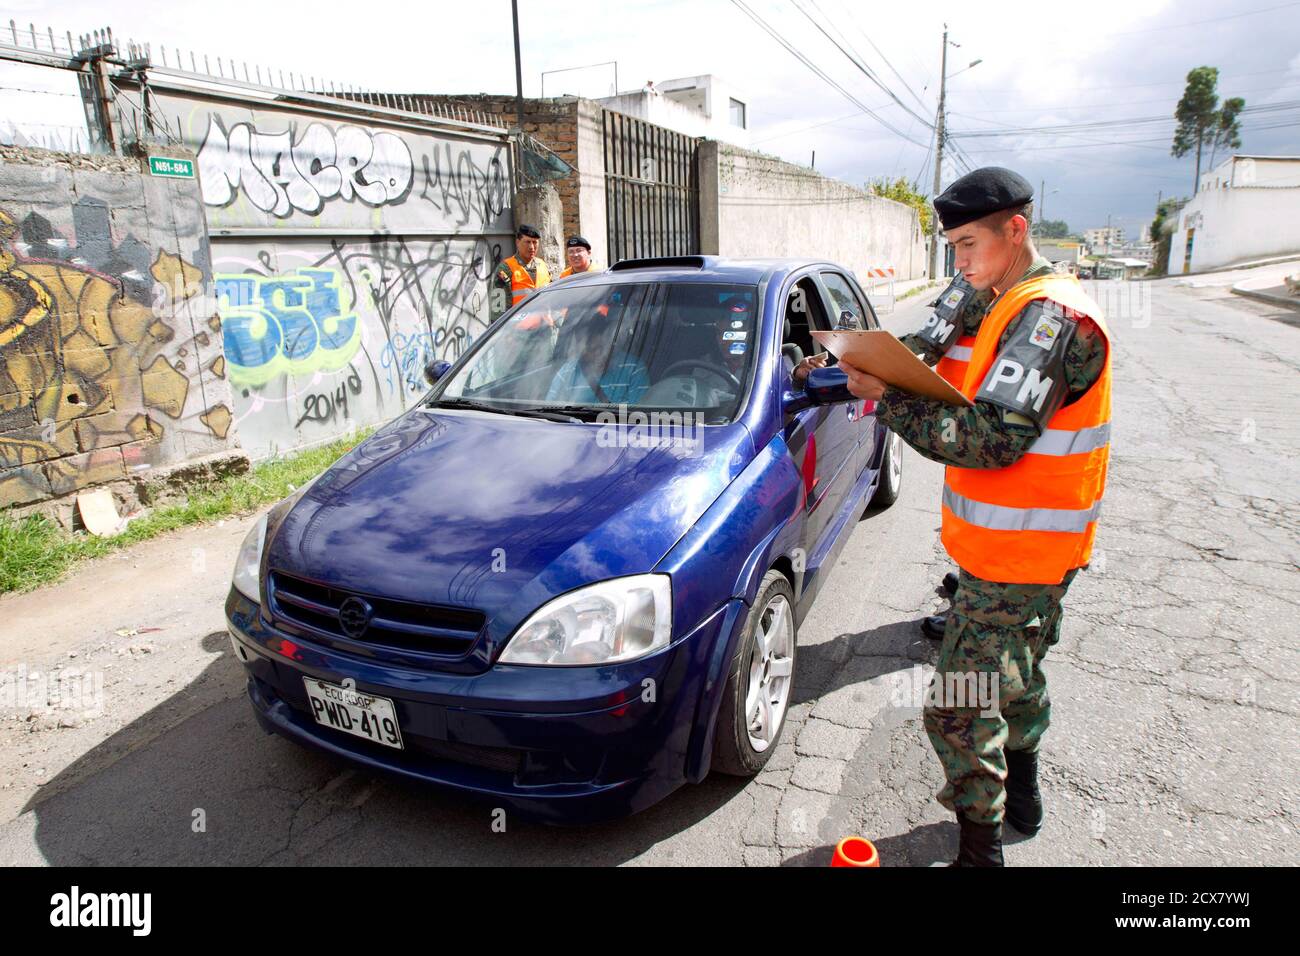 Ecuadorian military soldiers stop a vehicle on a street in Quito January 28, 2015. Ecuadorian Army perform vehicle searches on the streets in an effort to assist the police in reducing crime in the country. REUTERS/Guillermo Granja (ECUADOR - Tags: MILITARY CRIME LAW POLITICS) Stock Photo